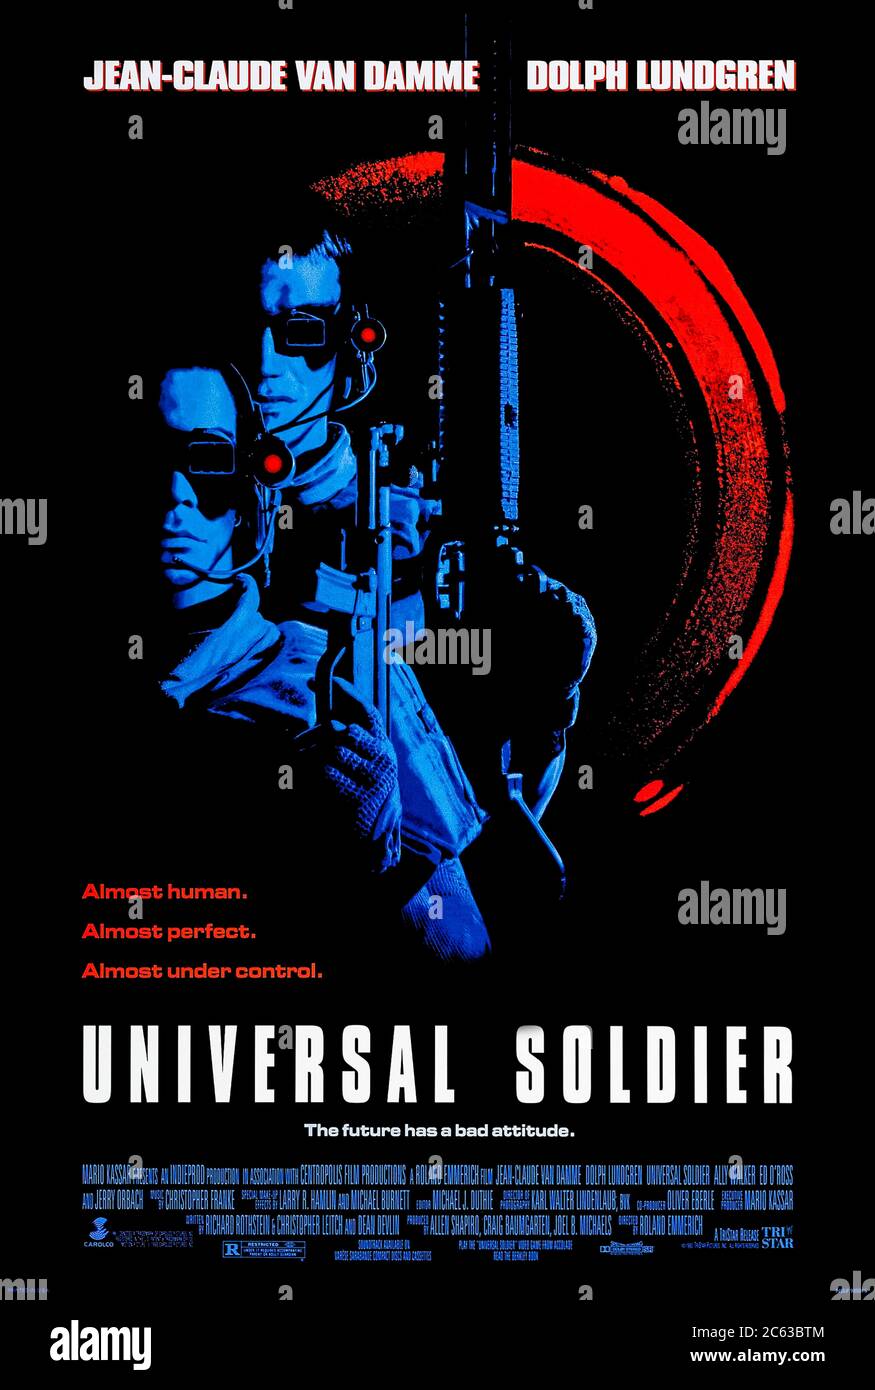 Universal Soldier (1982) directed by Roland Emmerich and starring Jean-Claude Van Damme, Dolph Lundgren and Ally Walker. Two dead Vietnam vets are reanimated into superhuman warriors but flashbacks from their previous lives haunt them. Stock Photo